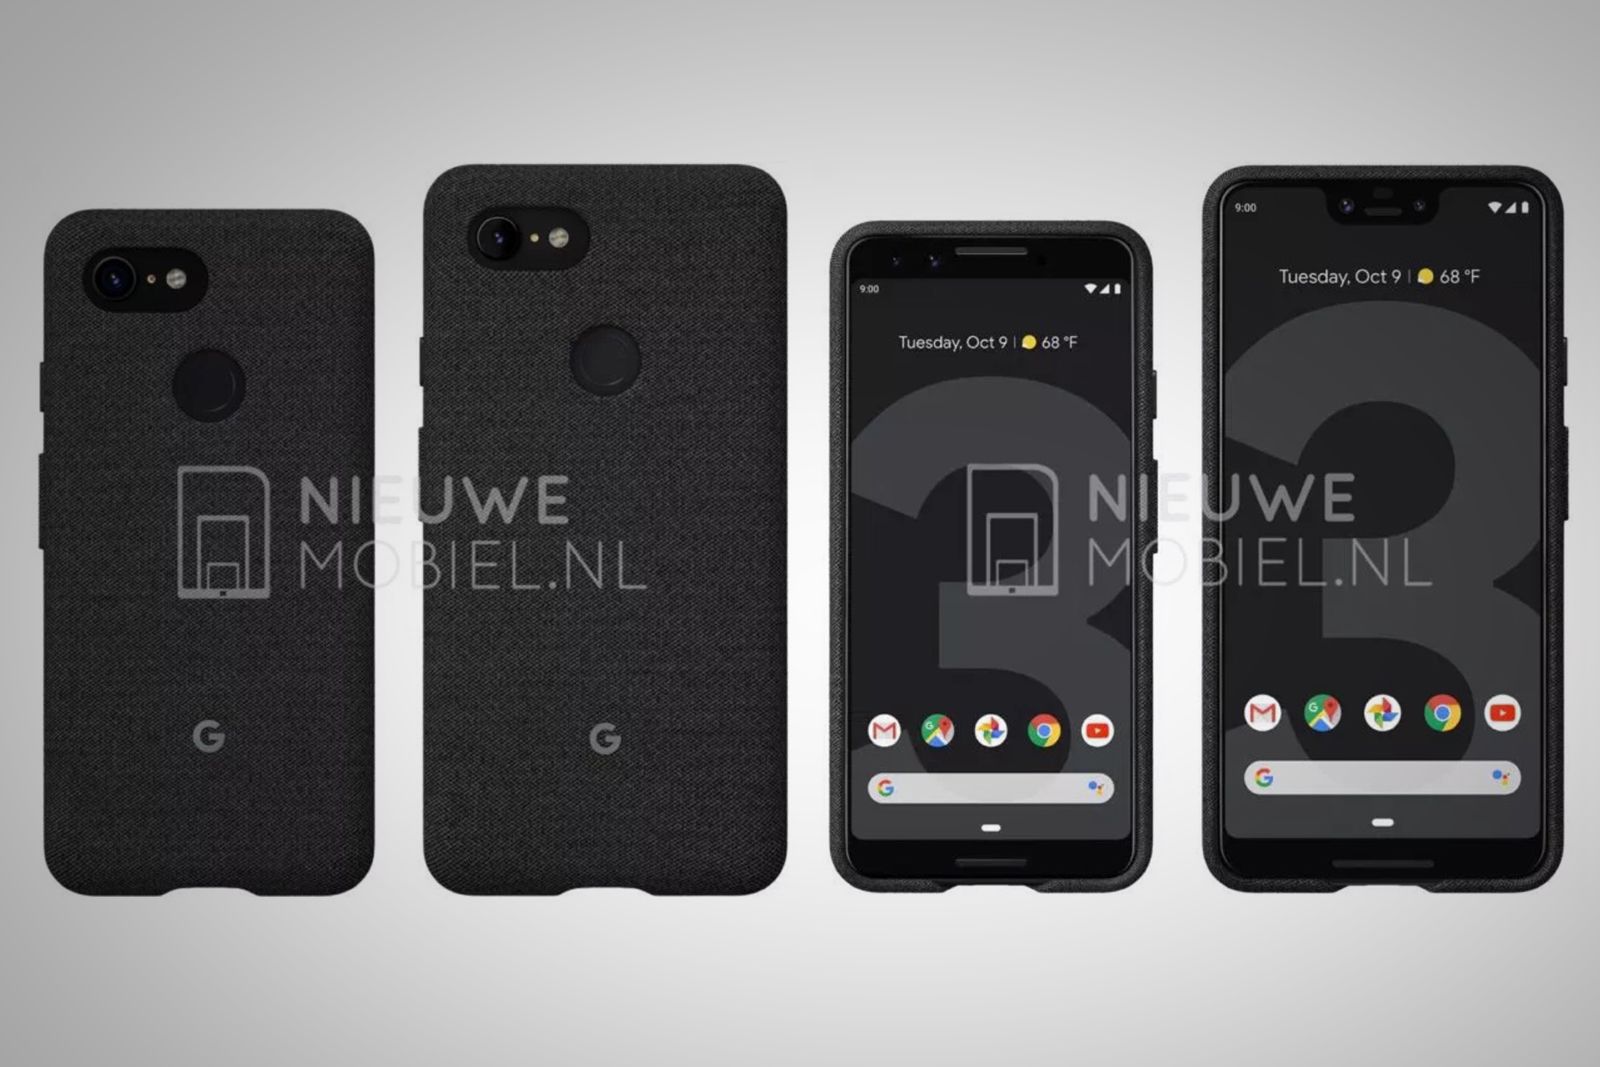 Heres the Google Pixel 3 and Pixel 3 XL side by side in new leak image 1